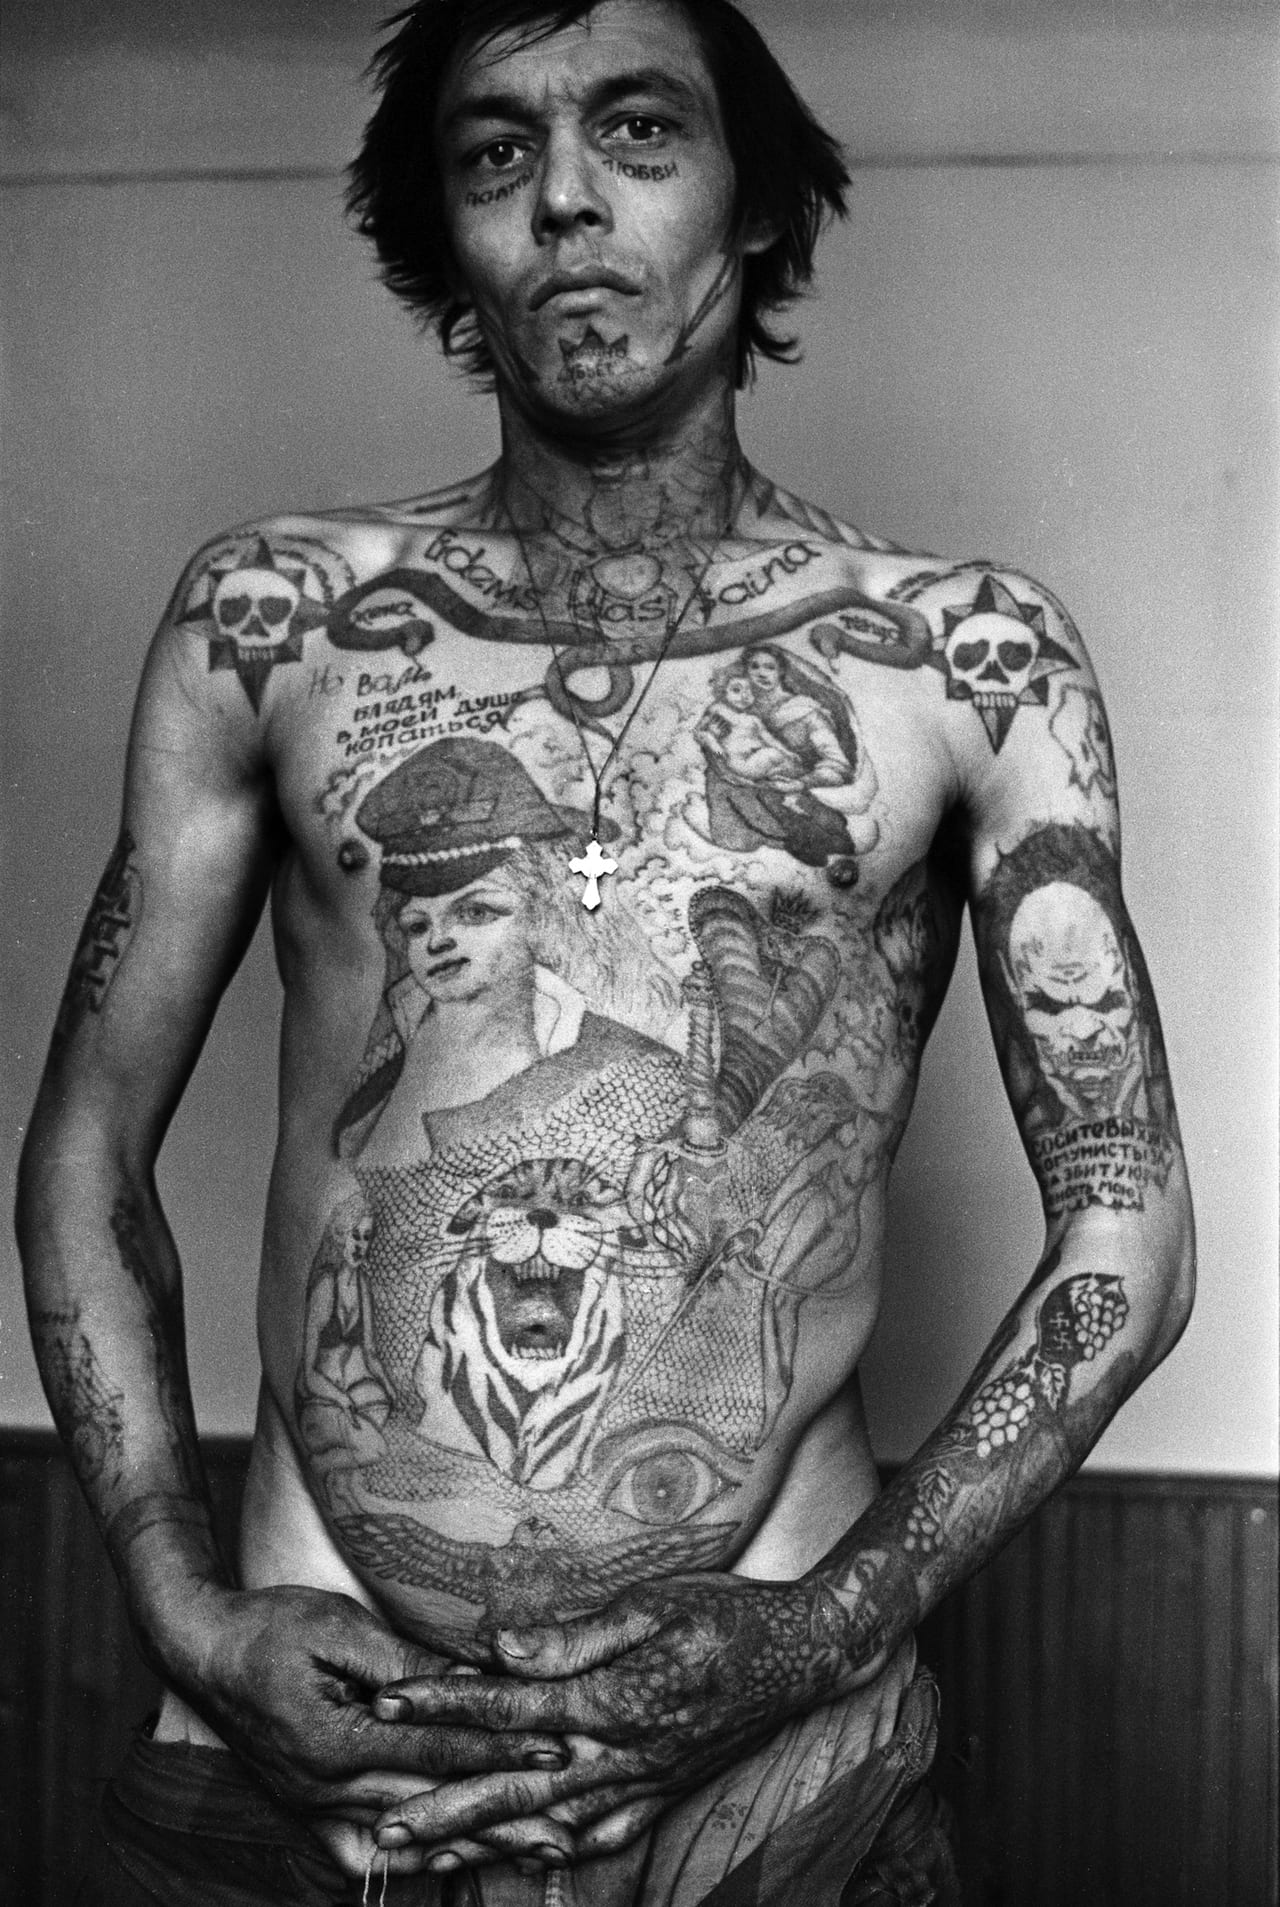 Russian Criminal Tattoo Archive  By Damon Murray  Stephen Sorrell  hardcover  Target